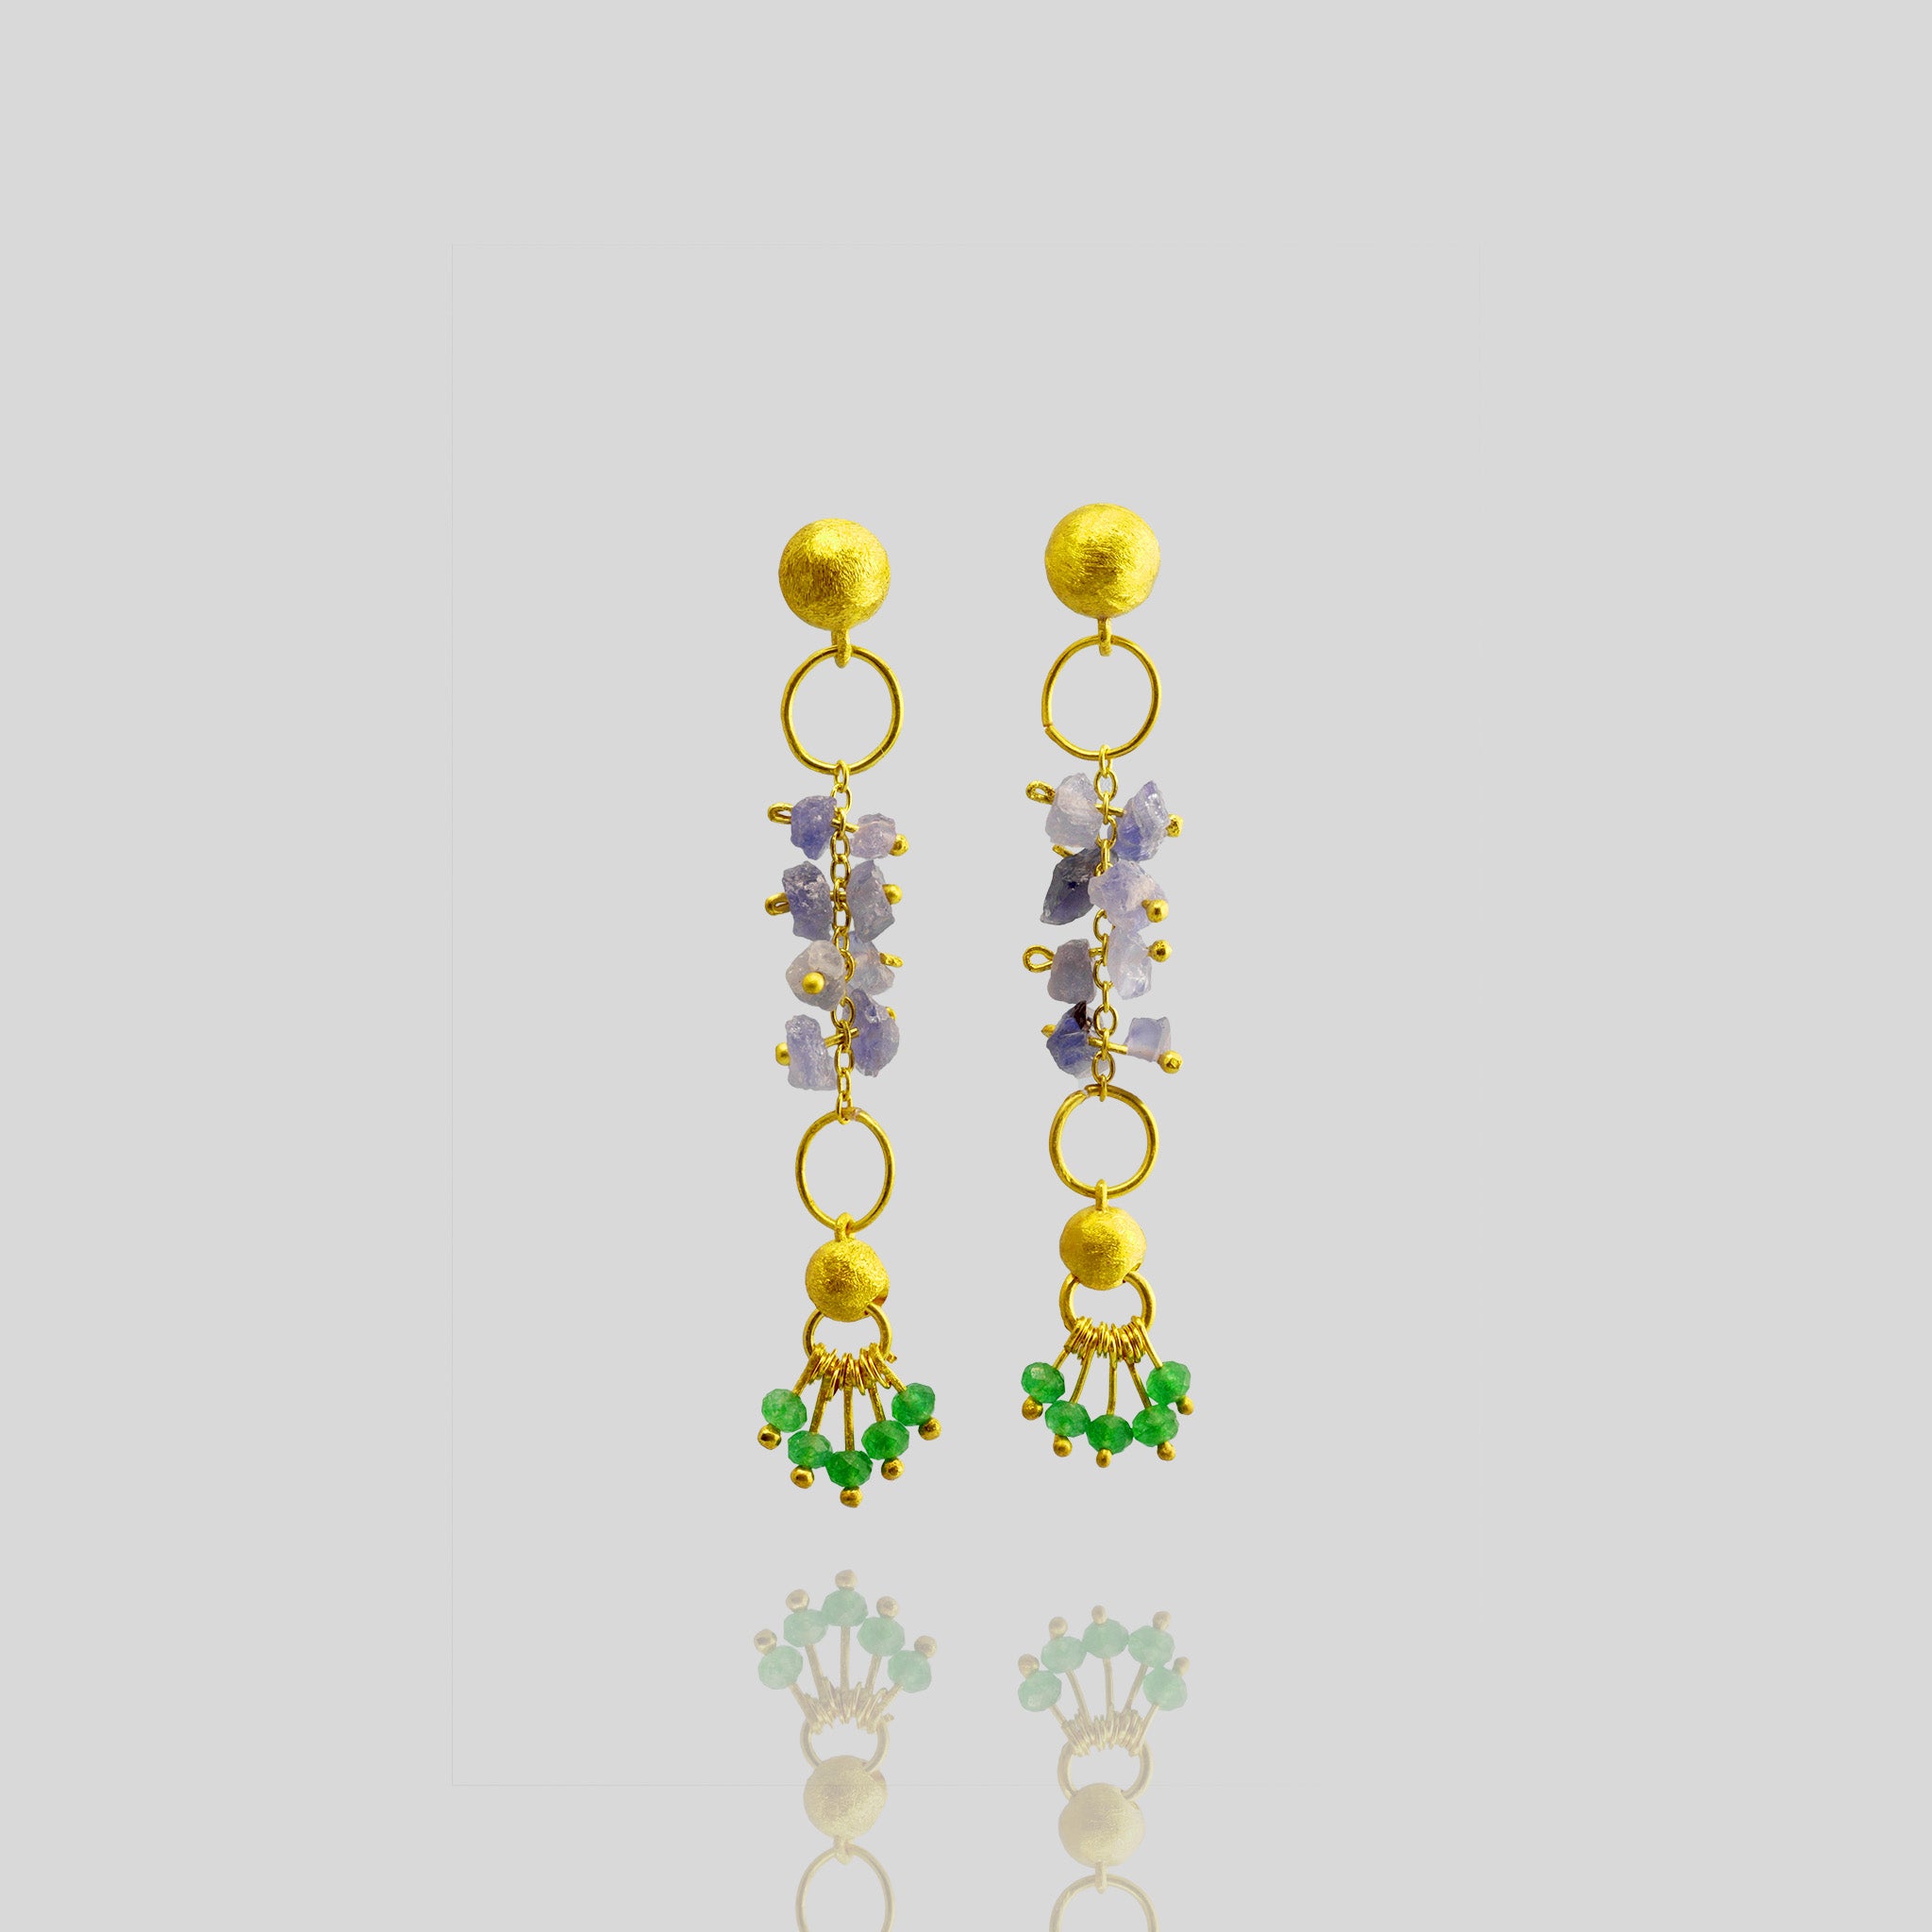 Hand-crafted 18k Yellow Gold Venus Earrings with raw Sapphire and Emerald accents, exuding organic beauty and luxury for any occasion.